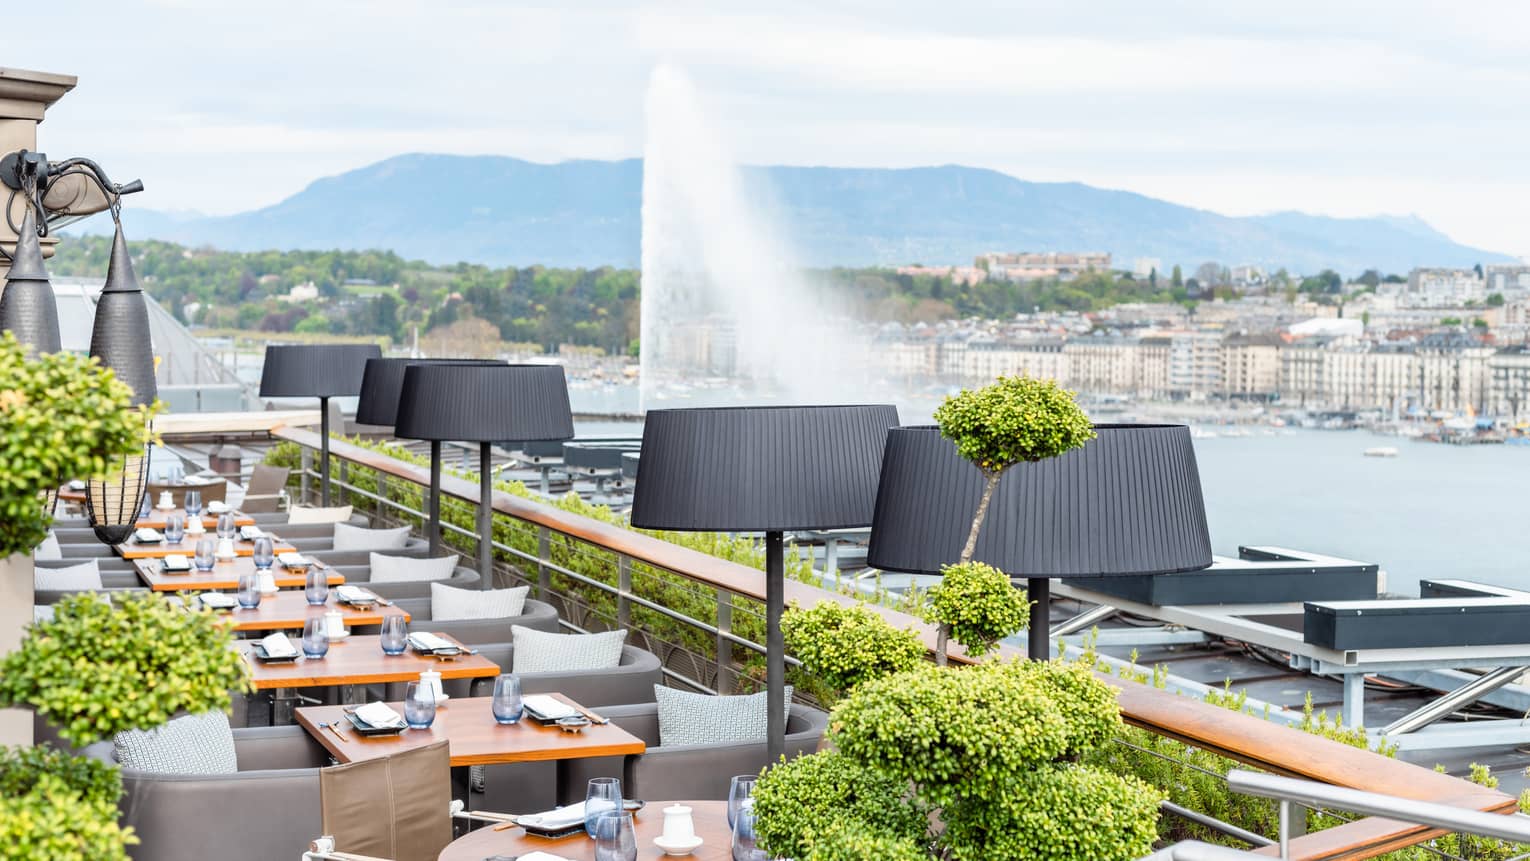 Restaurant terrace lined with tables overlooking Lake Geneva's Jet d'Eau